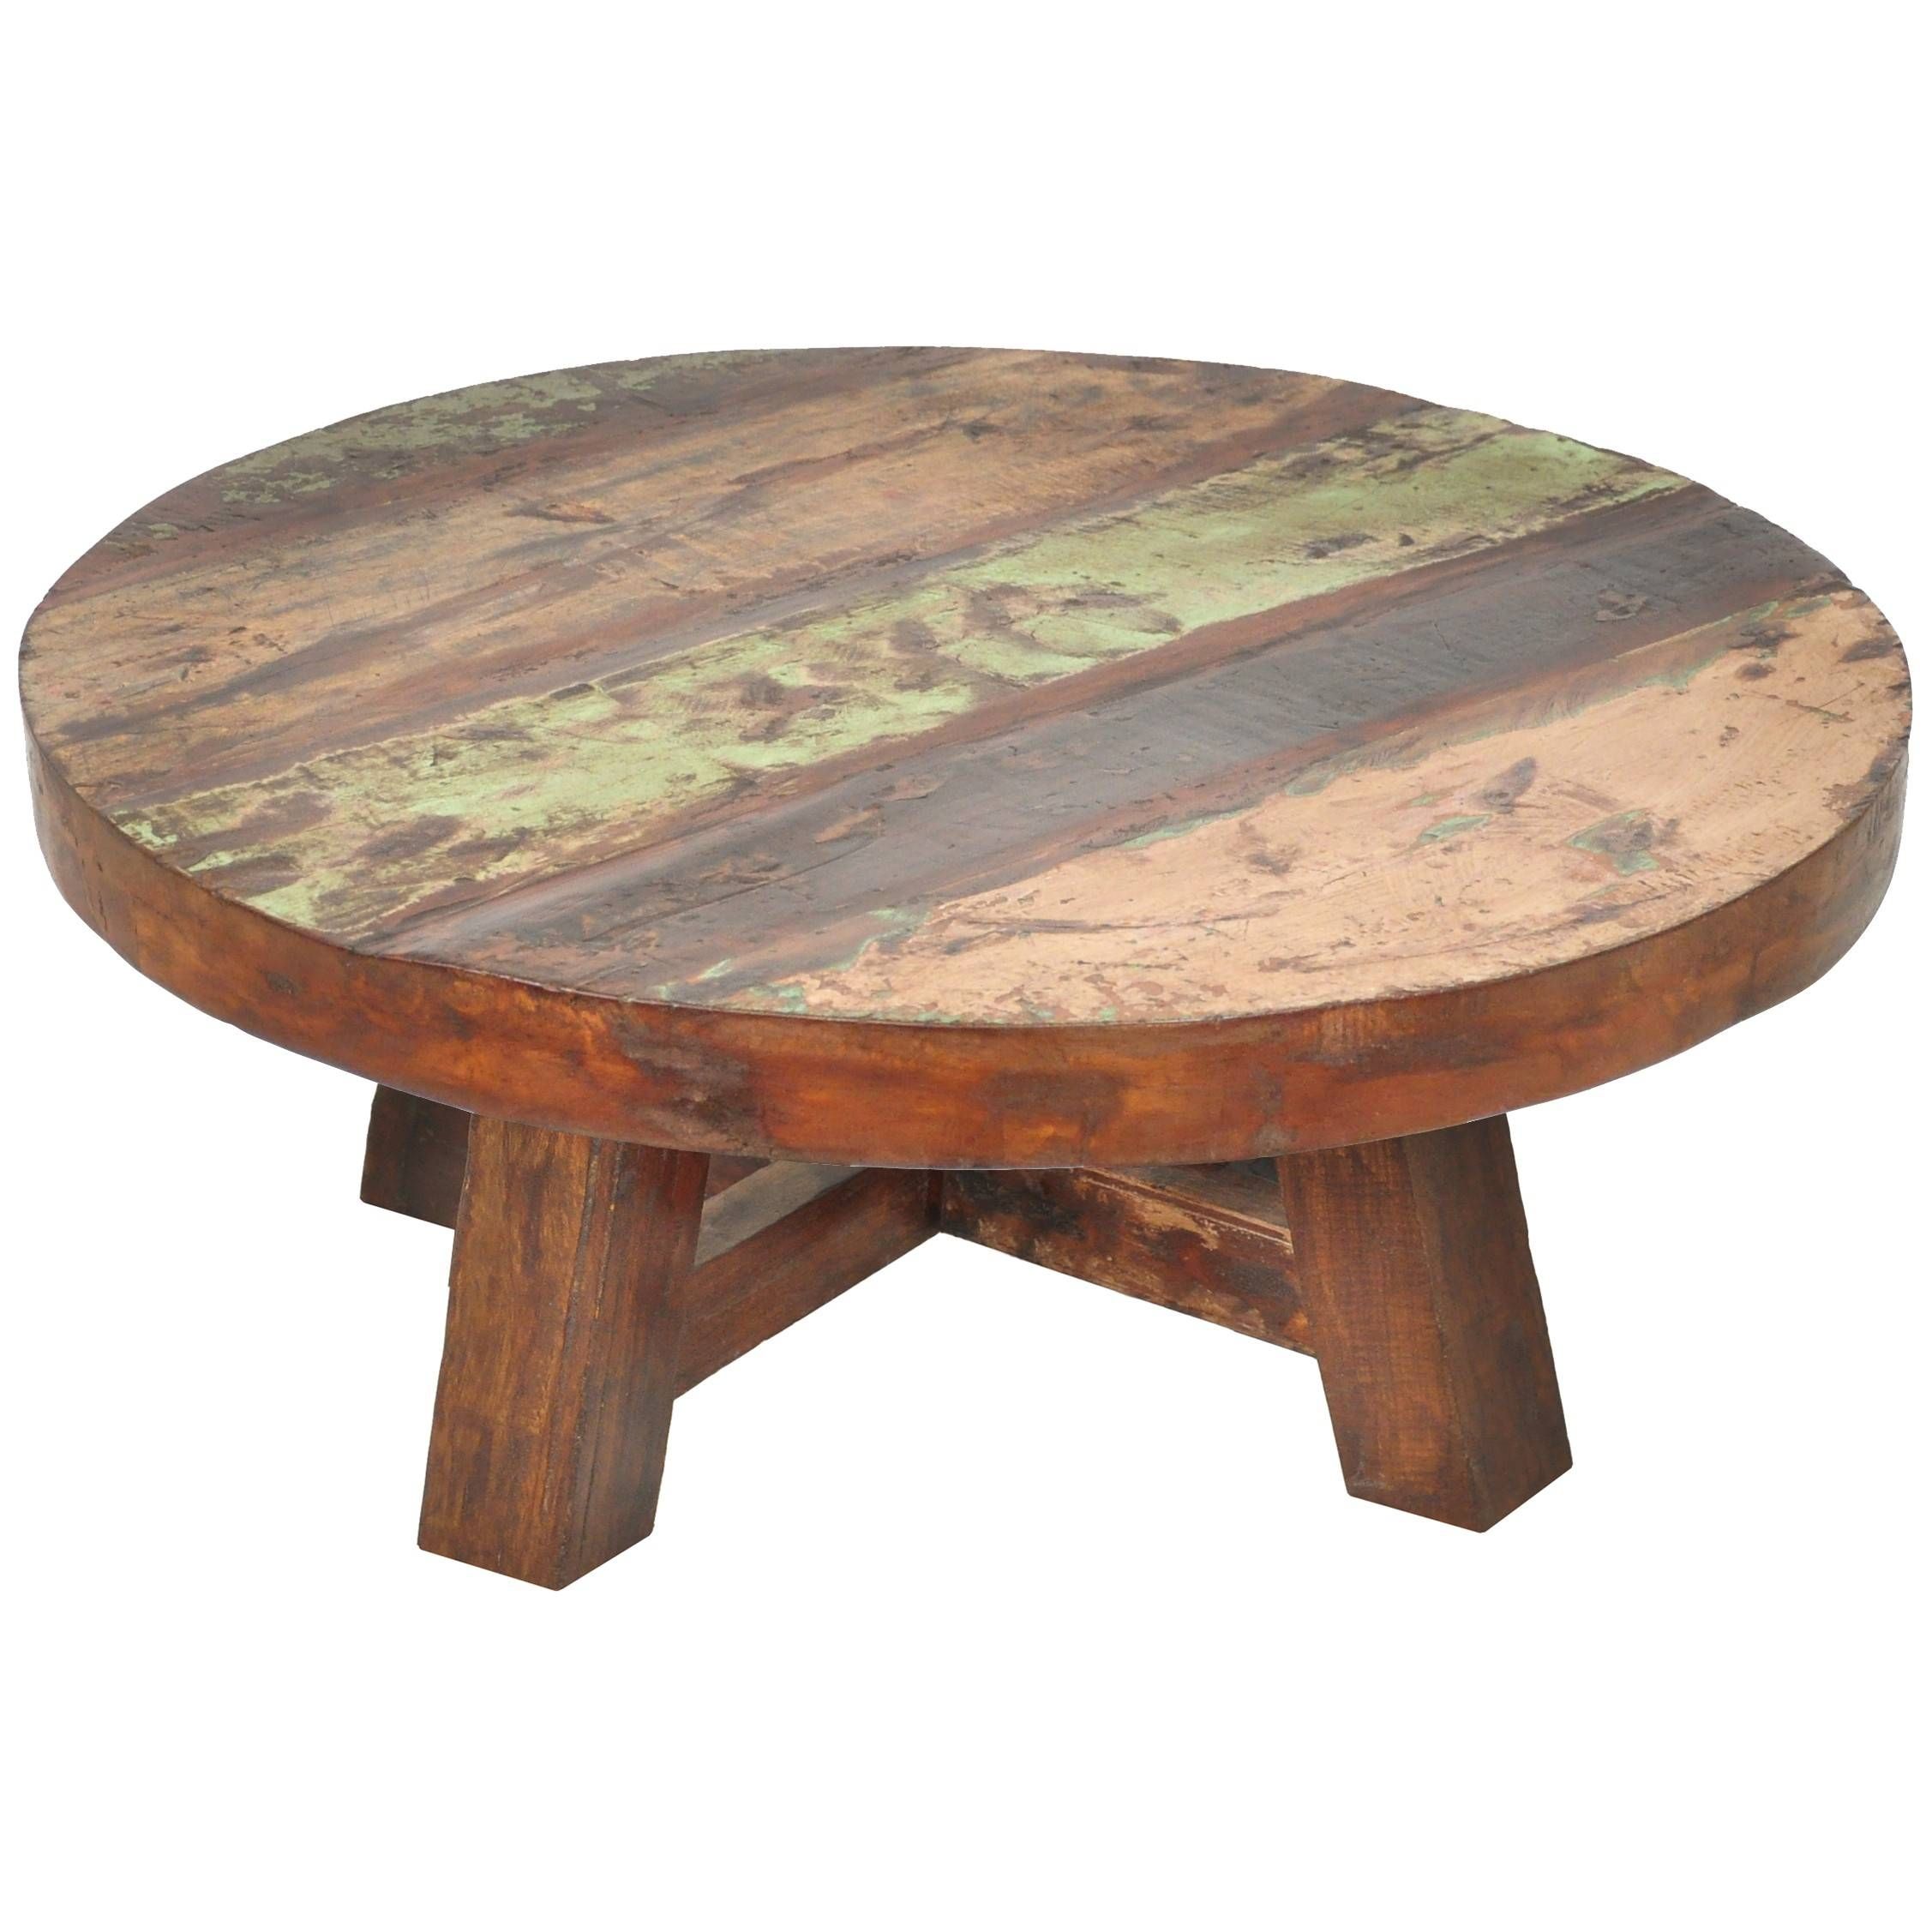 Furniture: Rustic Coffee Table On Wheels | Wood And Glass Coffee Throughout Reclaimed Wood And Glass Coffee Tables (View 21 of 30)